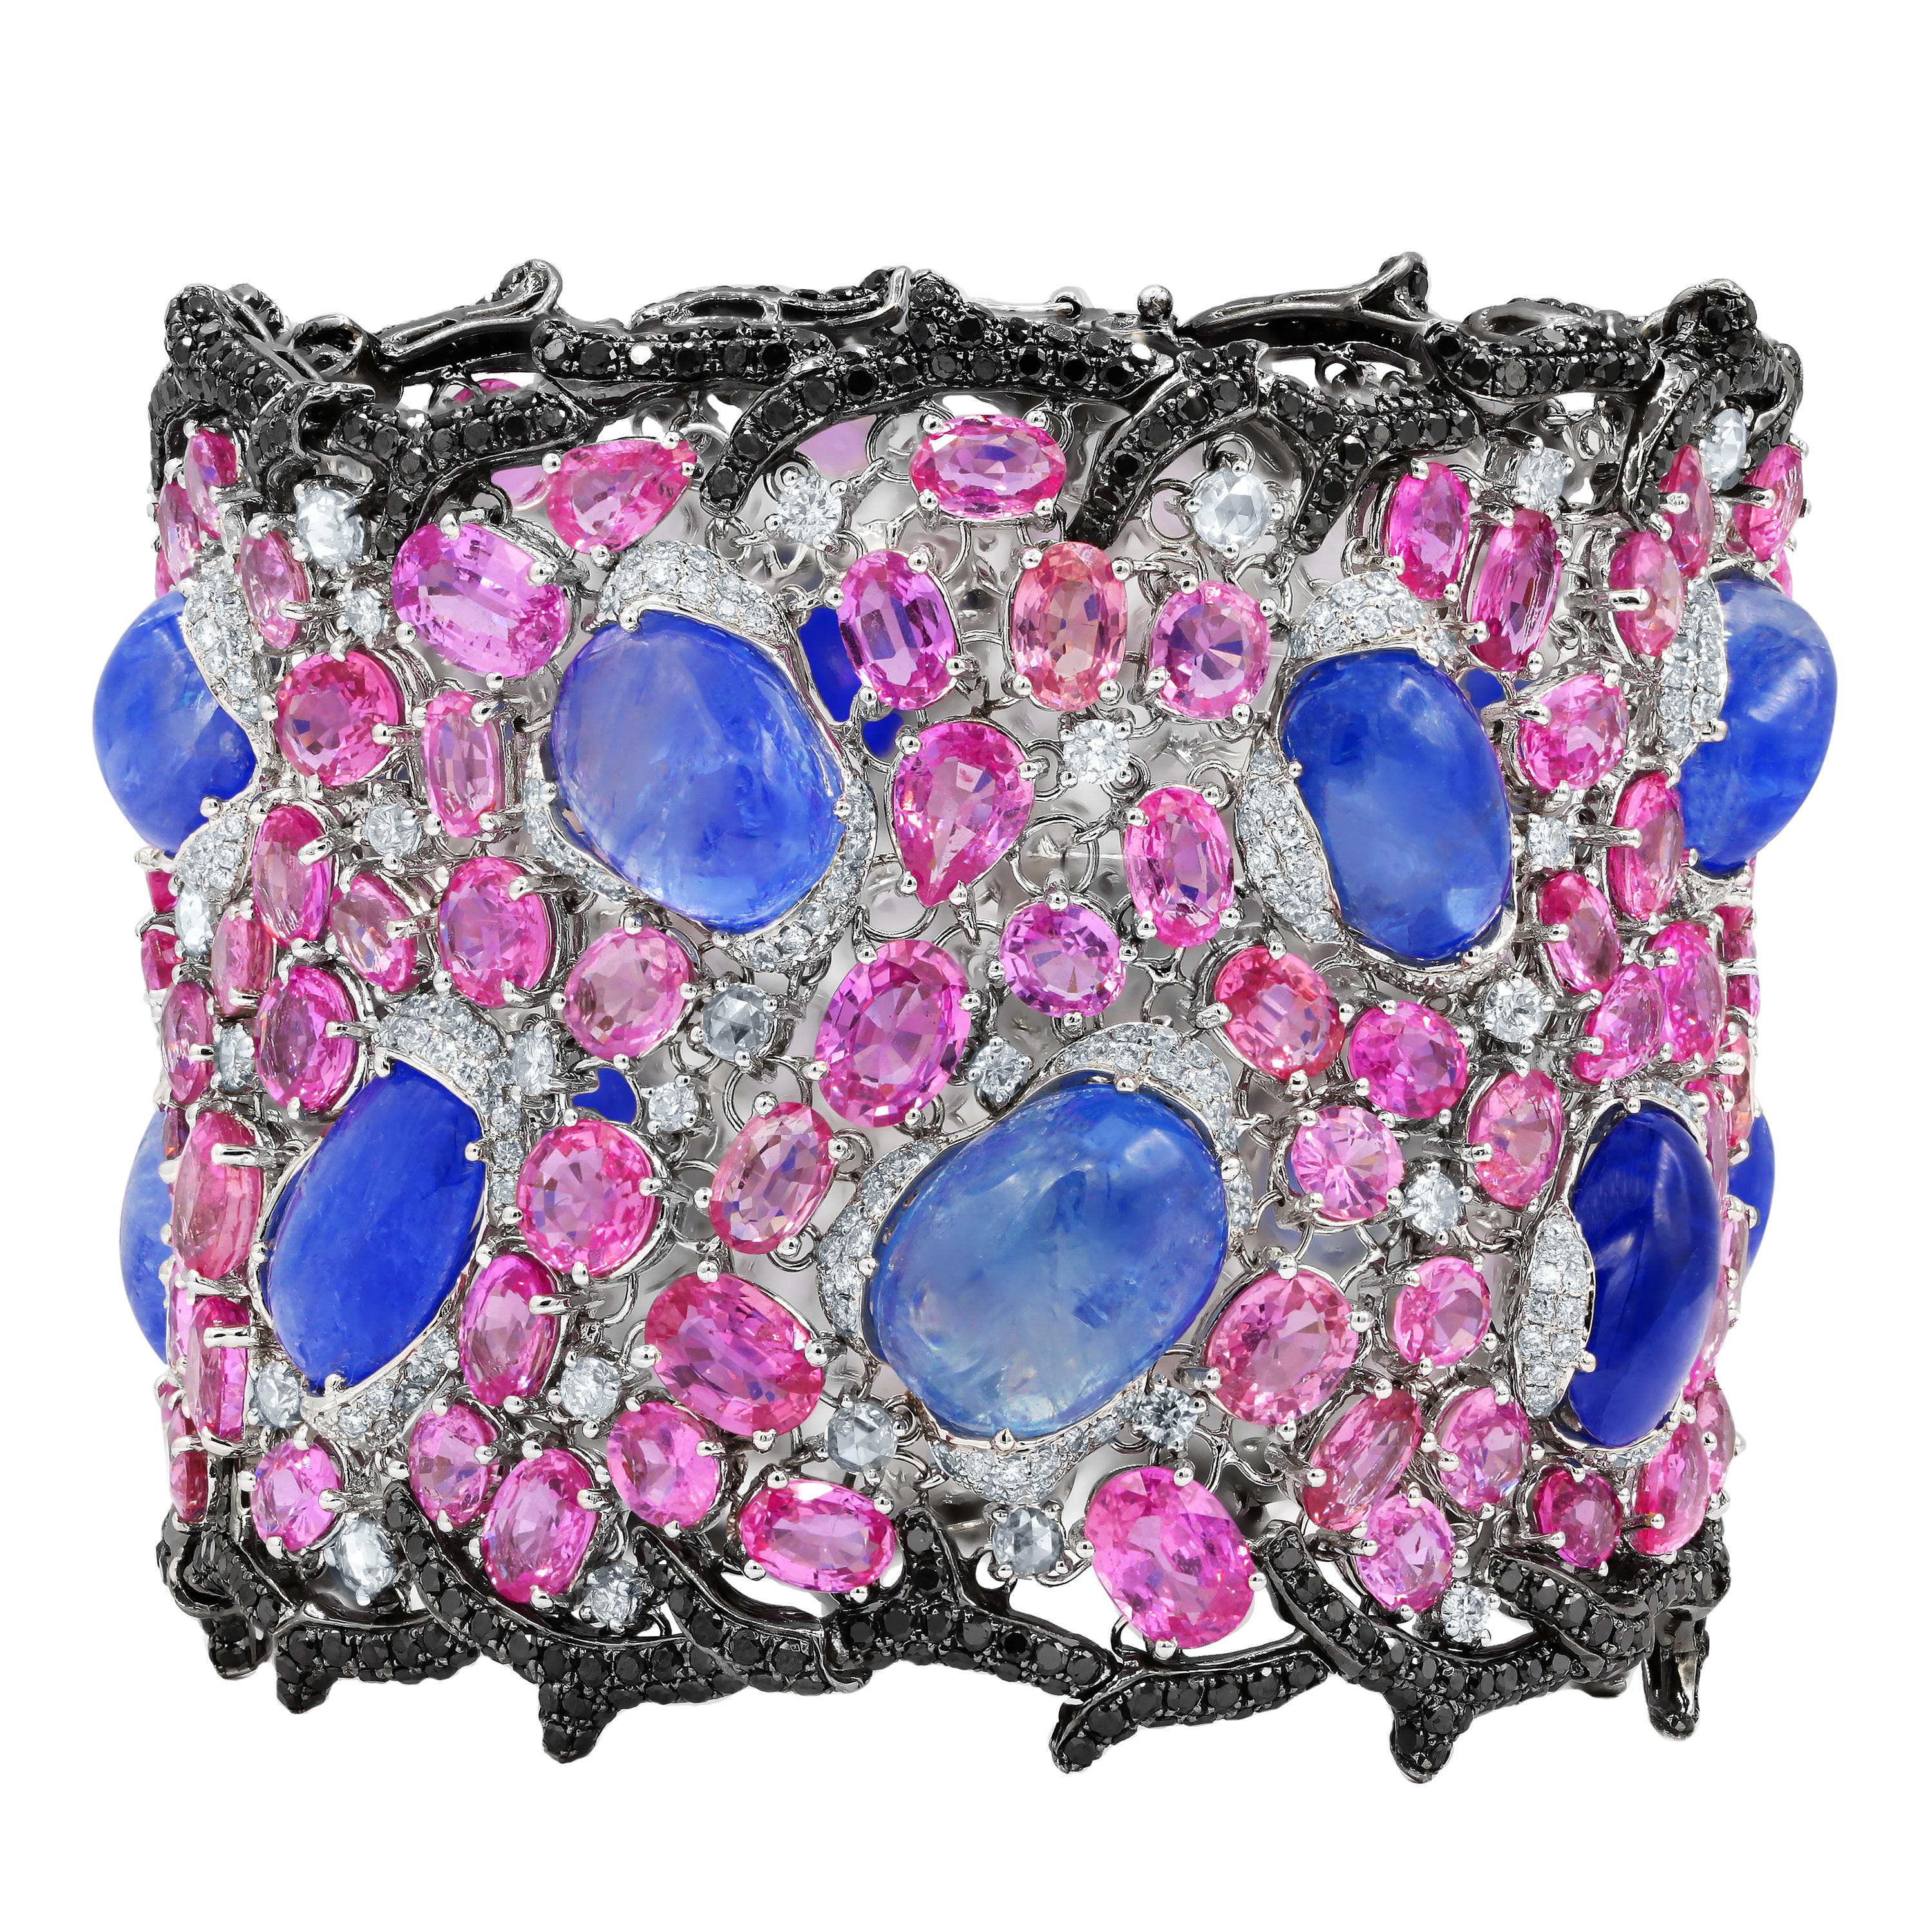 18kt white gold bracelet featuring 68.21 cts of muti-color sapphires and 2.27 cts of round diamonds 
Diana M. is a leading supplier of top-quality fine jewelry for over 35 years.
Diana M is one-stop shop for all your jewelry shopping, carrying line